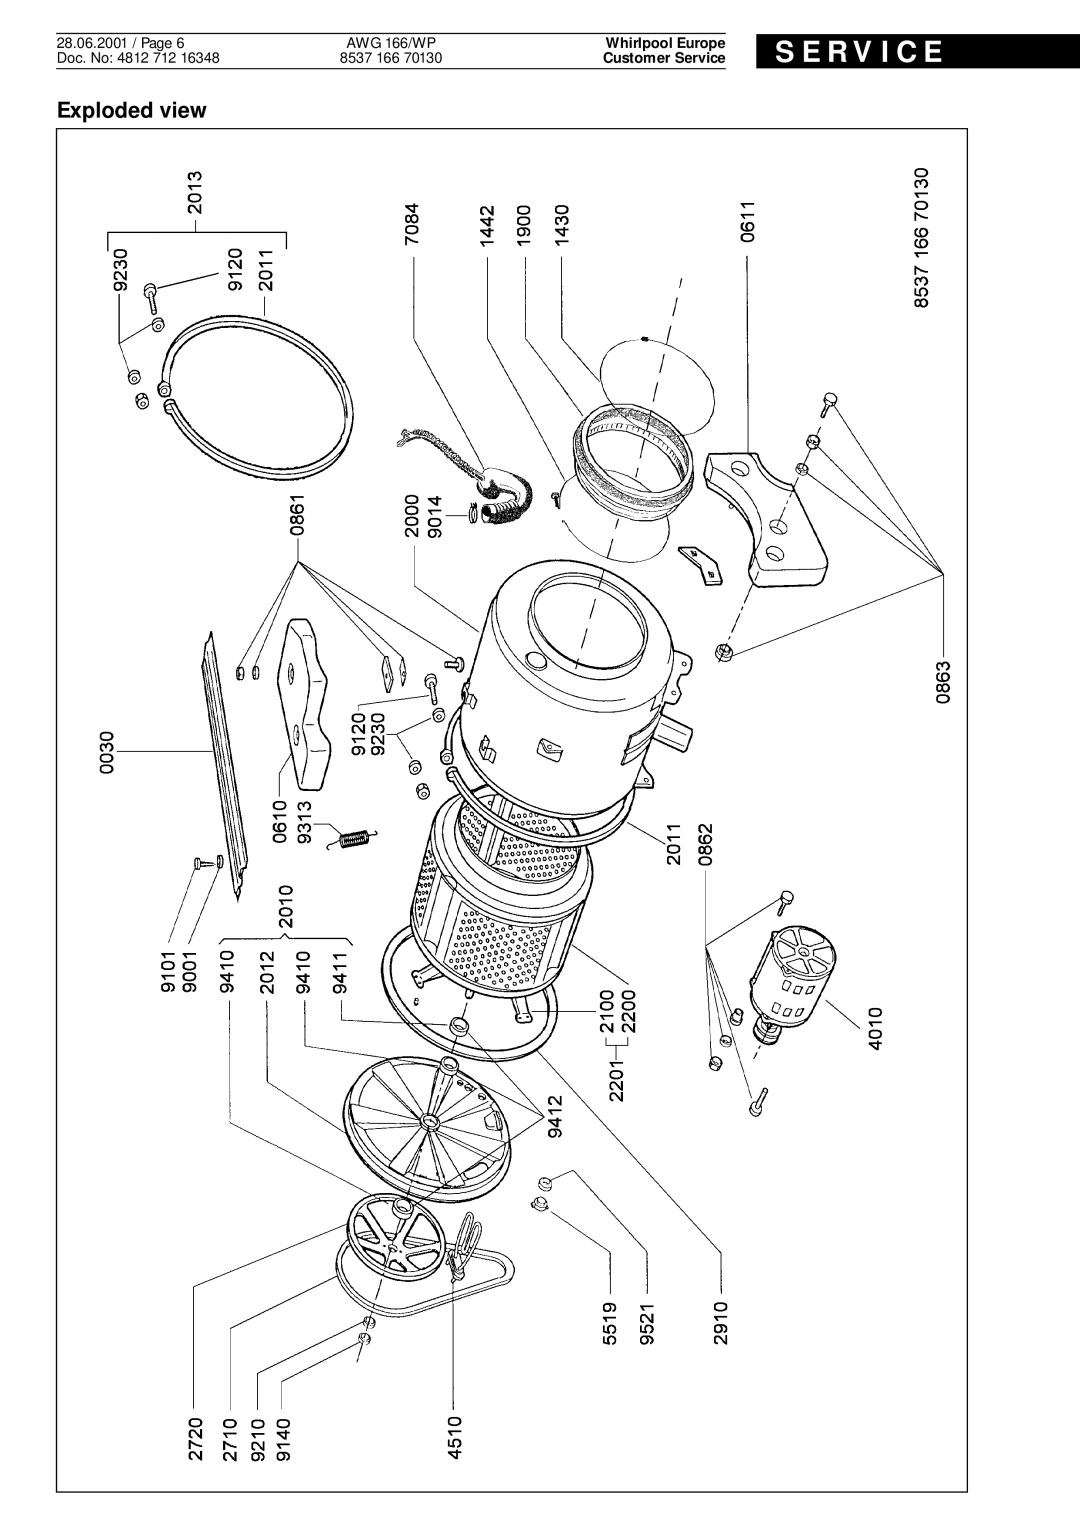 Whirlpool AWG 166 wp service manual S E R V I C E, Exploded view, Whirlpool Europe, Customer Service 